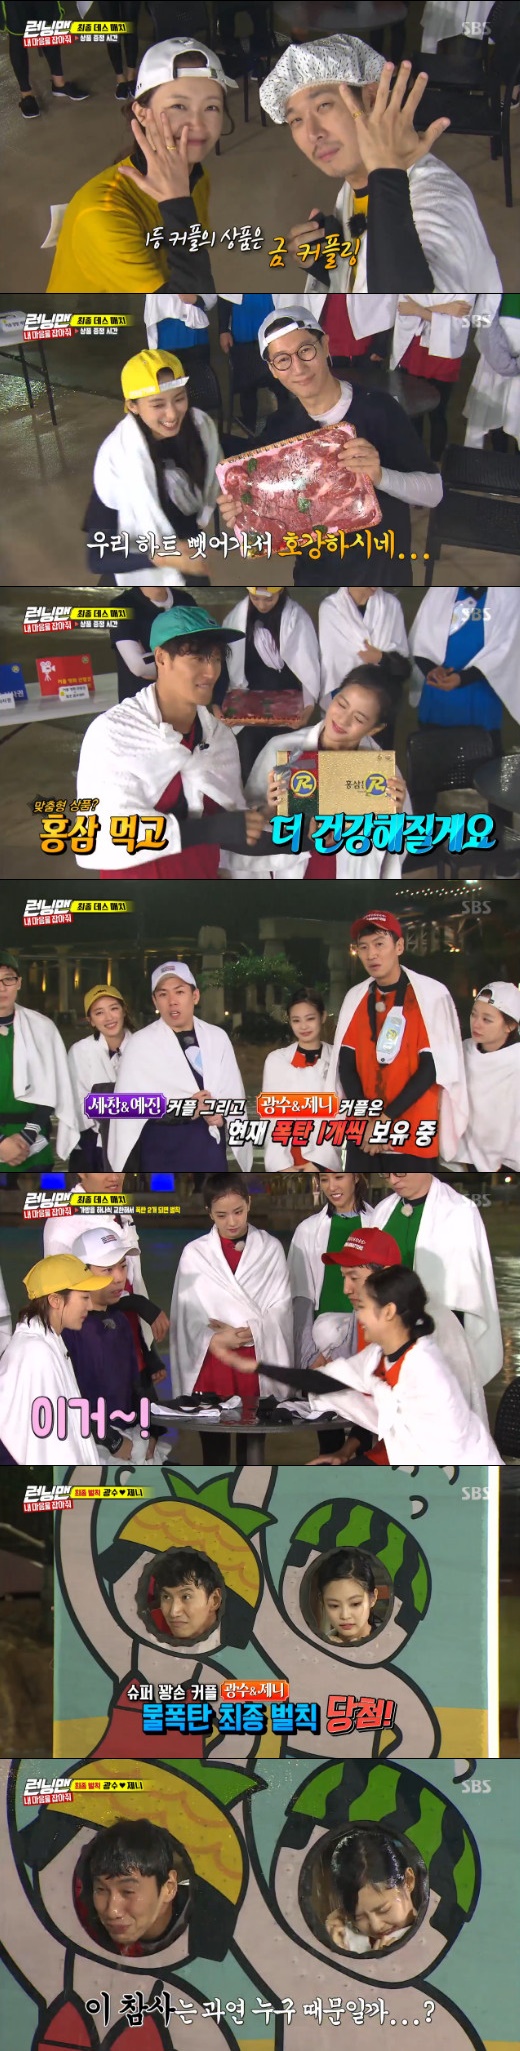 Running Man guests show off their infinite charmOn SBS Running Man broadcasted on the 15th, Han Eun-jung, Yoon Bora, Hwang Chi-yeul, and Pyo Ye Jin appeared with Black Pink Jenny Kim and JiSoo, and performed a couple Take My Heart in a cool water park with a summer special.On this day, the charm of the guests was highlighted in the race, from the strange appearance to the sexy and youthful appearance.They were different from each other, since they were young, and they were revealed by the first release of their childhood photos.Their charms were infinite in the couples race, especially in dance and charm missions.Han Eun-jung drew attention with a cute youthful dance on the dance mission, which he suddenly made a top-down costume and surprised with a bold hair dance.Surprised by Han Eun-jungs dance dance, the members were busy drying him, and Han Eun-jung, who did not care about it, laughed.Yoon Bo-ra, a former SeSTa, was impressed by the dance, which was applauded for improvisation that fits each mission.Jenny Kim and JiSoo have shaken the hearts of male members since their appearance; the two, who reported on their recent break for a year, even told Yang Hyun-suk about the video letter.Jenny Kim, boss, let us make a comeback twice a year, JiSoo said, and he said, Yes, we have to do it now.Jenny Kim even built a triangular poem with Lee Kwang-soo to heart-beat him: I think its time for Chairman Yang Hyun-suk to let me.My brother, Gwangsu, and I have a drink of Suul (drinking)? He made Lee Kwang-soo sit down.Pyo Ye-jin also gave a laugh with the wrong look.In addition to making Yang Se-chan embarrassed by his name, not his mate Yang Se-chan, he was embarrassed by the members of the three-way city, which was followed by the dull three-way city.Hwang Chi-yeul also showed off his charm as the only one of the guests. He was also surprised by his extraordinary dance skills.Meanwhile, in the couple Race, where the name tag was torn and the bomb was to be handed over, the Hwang Chi-yeul name tag was opened.As a result, Jeon So-min - Haha won first place, Ji Seok-jin - Yoon Bo-ra came in second place, and Kim Jong-guk - JiSoo was third.The two teams with the bombs were Yang Se-chan - Pyo Ye-jin, Lee Kwang-soo - Jenny Kim.In the final death match, Lee Kwang-soo - Jenny Kim was beaten and penalized for a water balloon.